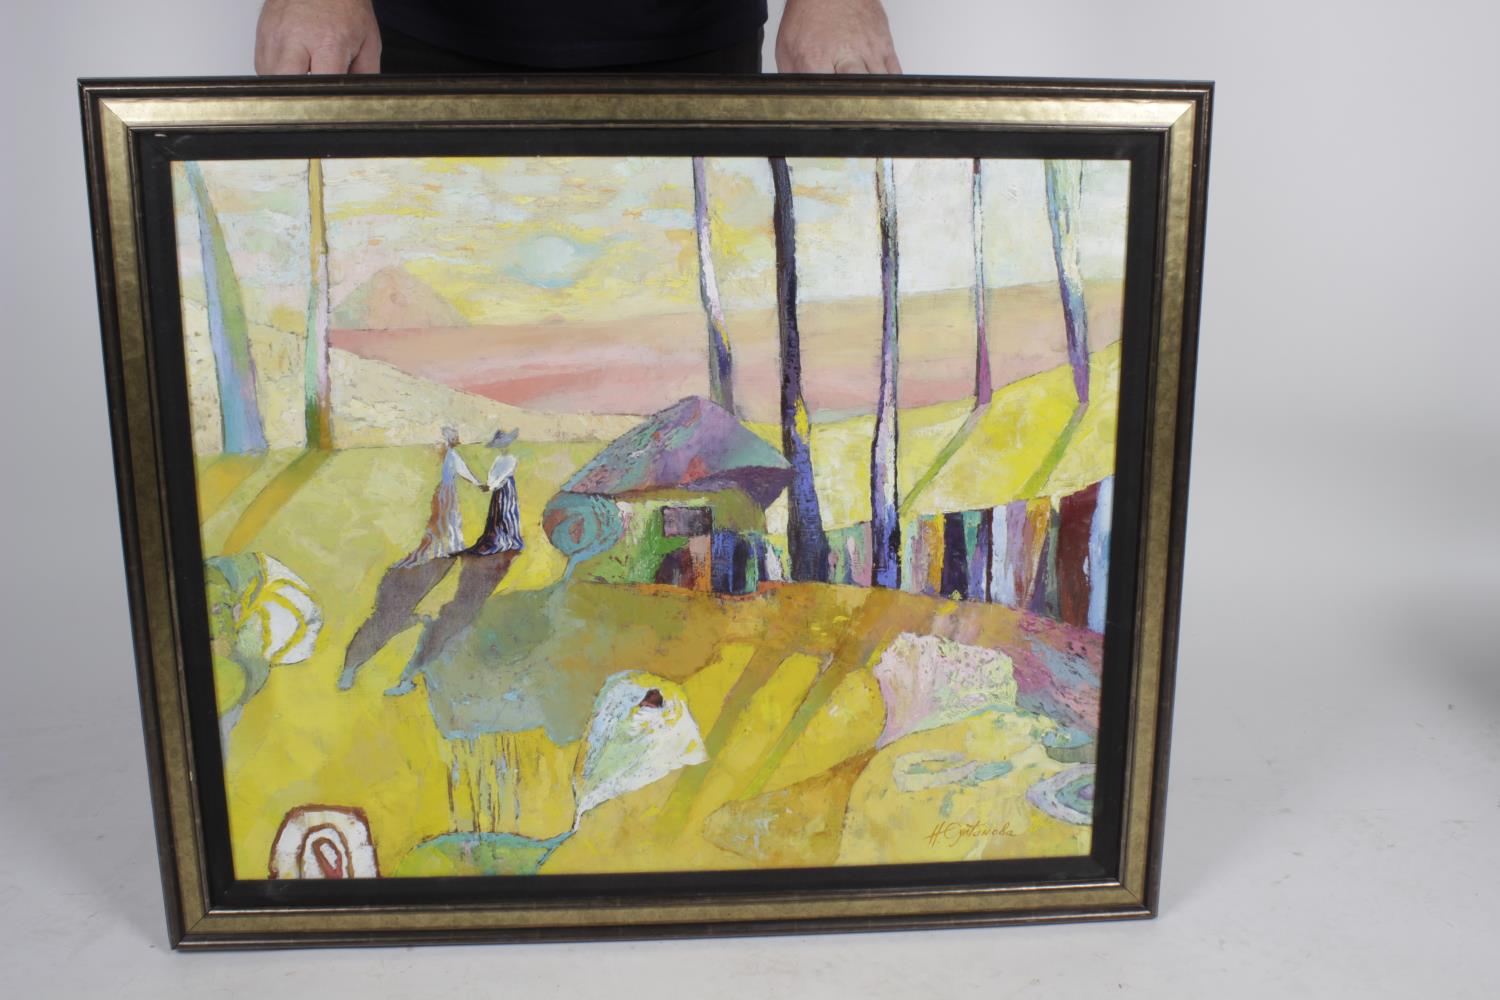 ARR Natalya Sultanova, (modern), 'The Meeting', two figures in a landscape, oil on canvas, signed in - Image 2 of 4